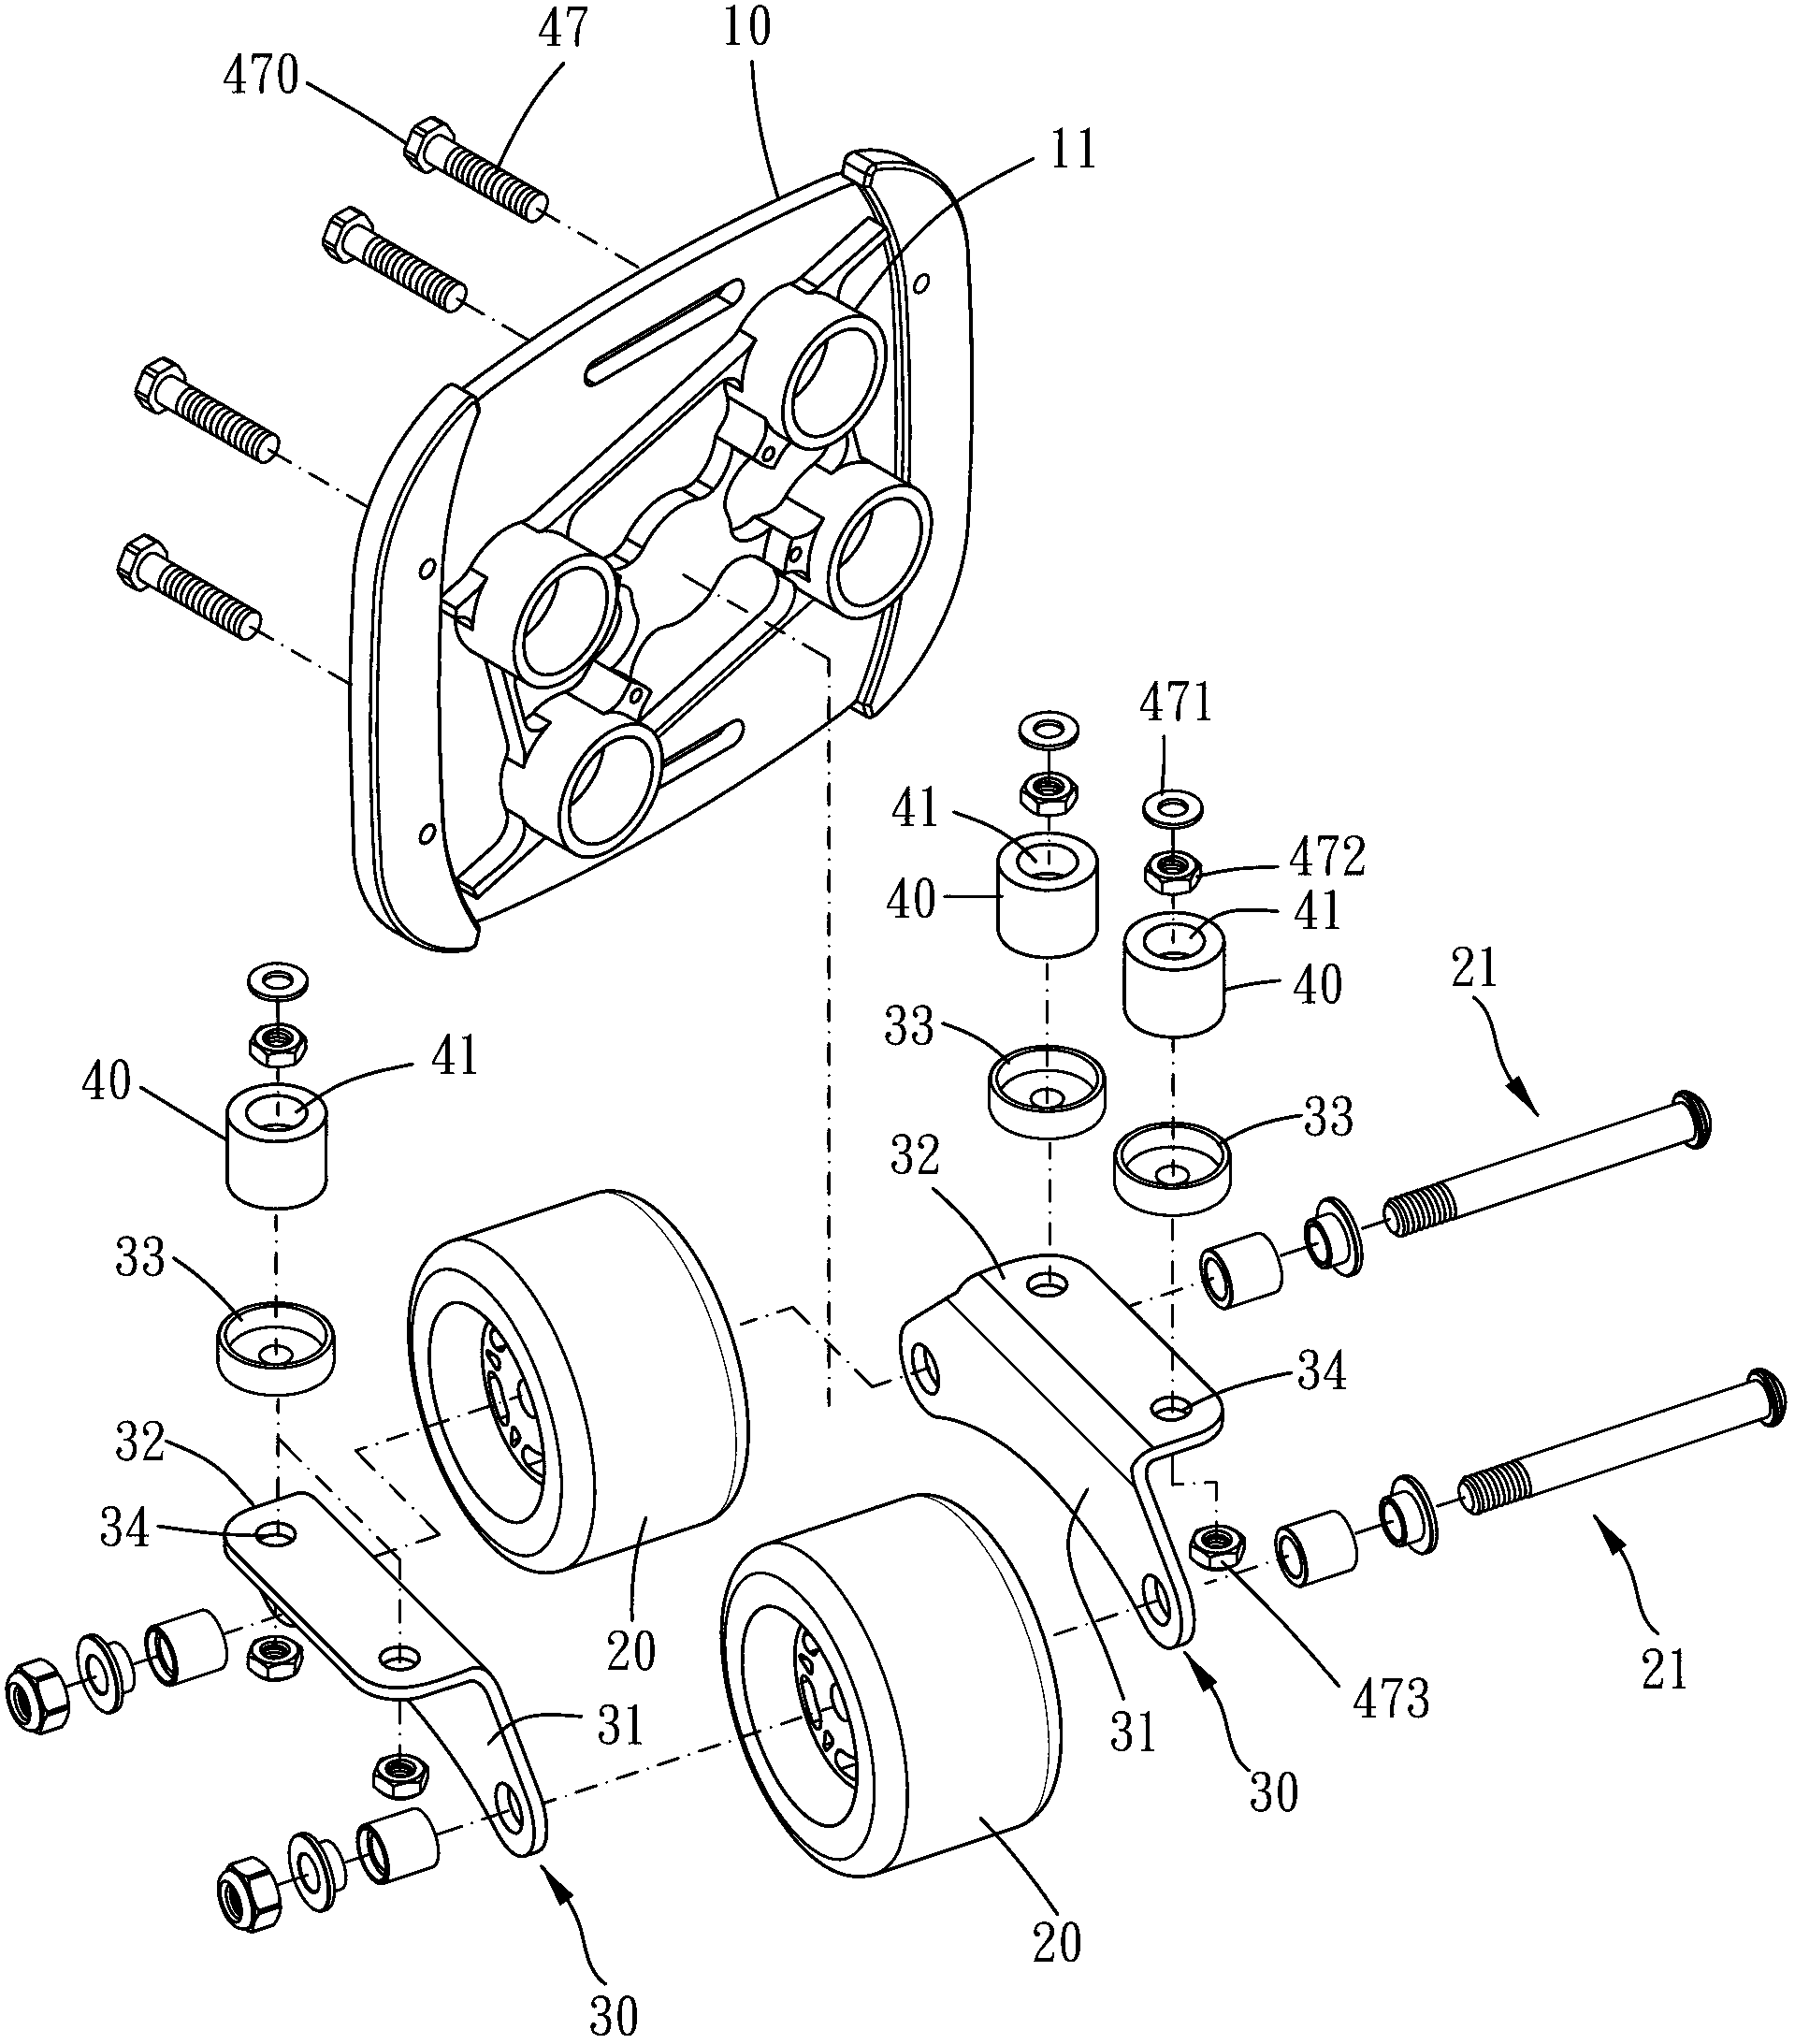 Drift plate with independent tube shock-absorbing structure